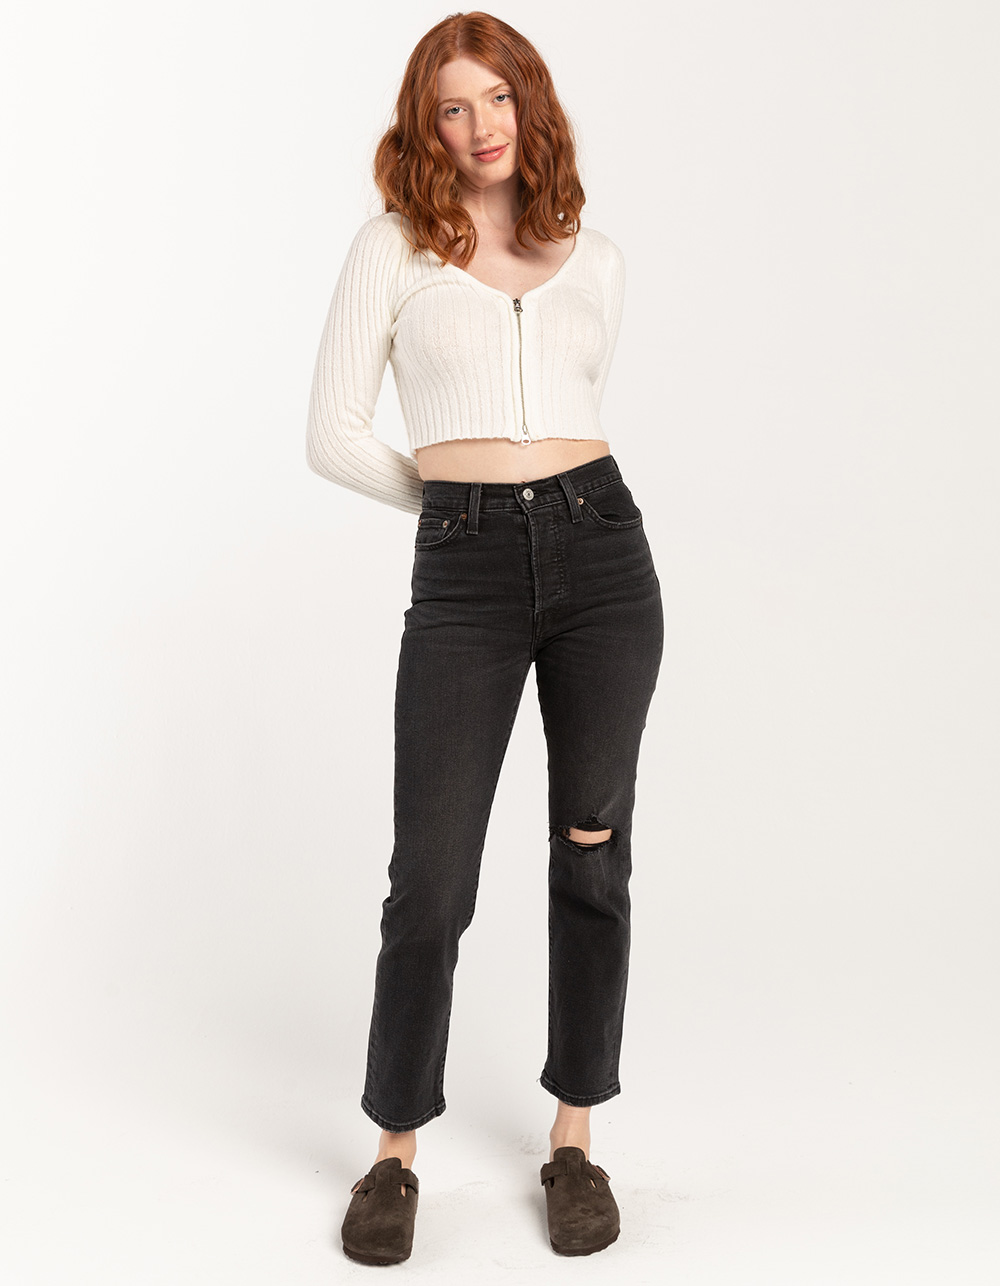 Hybrid & Company Butt-Lifting Jeans Are a Wardrobe Game-Changer